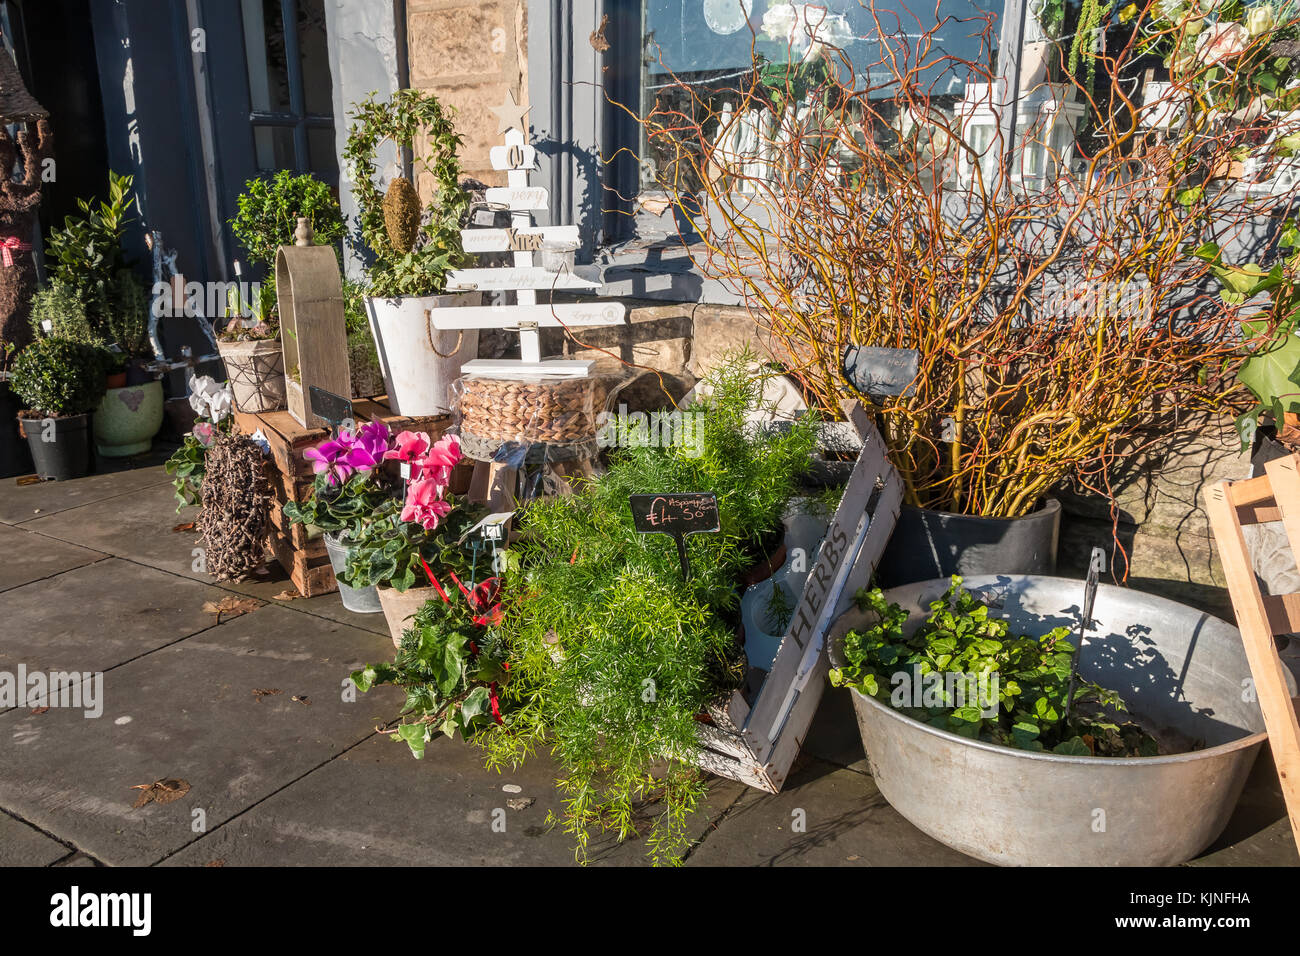 A florist shop window and street display of flowers, plants, gifts and flower arranging materials in bright winter sunshine Stock Photo